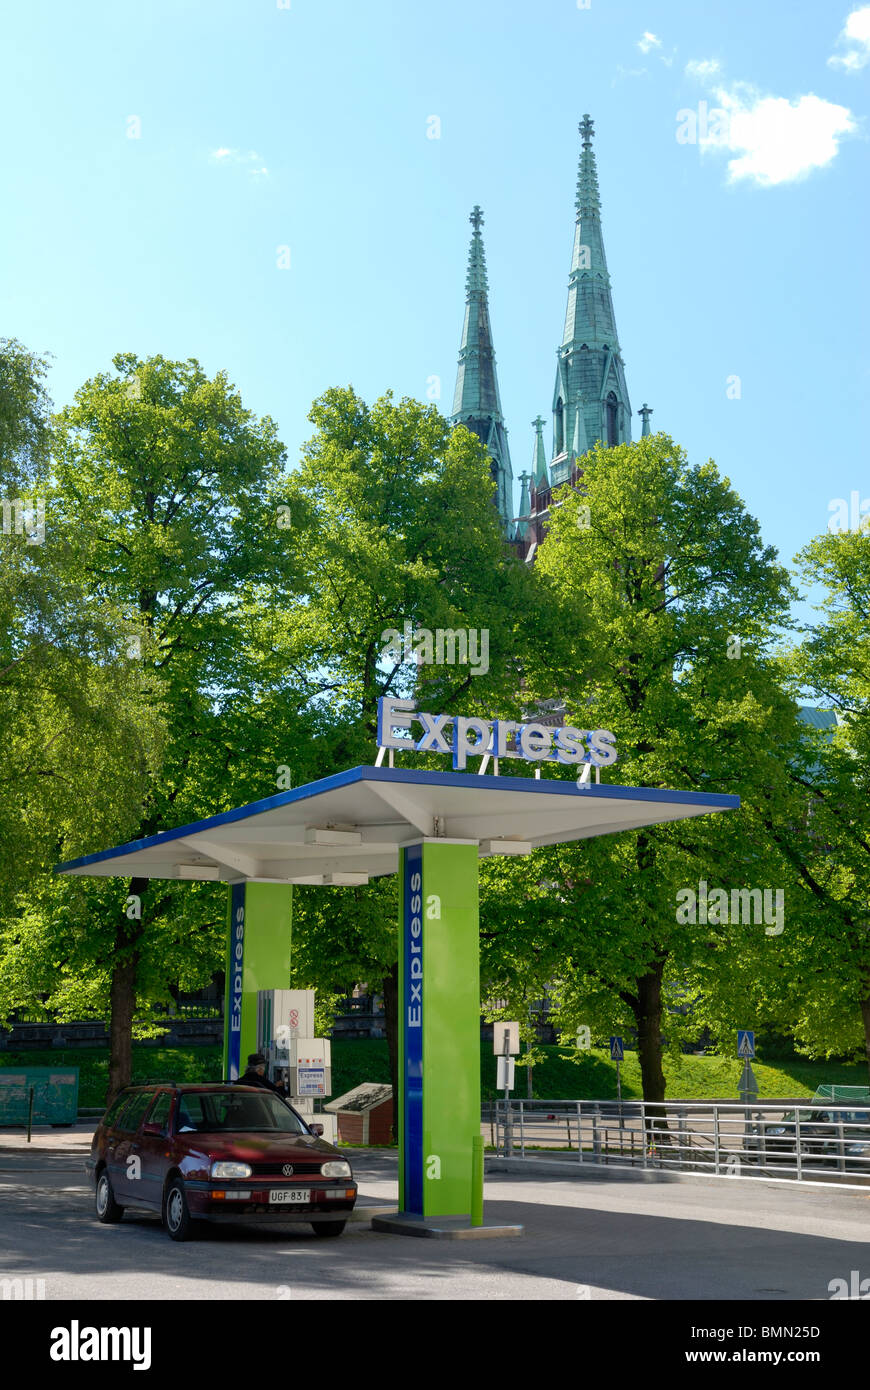 There are only a few filling stations in the downtown of Helsinki. Neste Oil Company has a filling station at the unique locatio Stock Photo